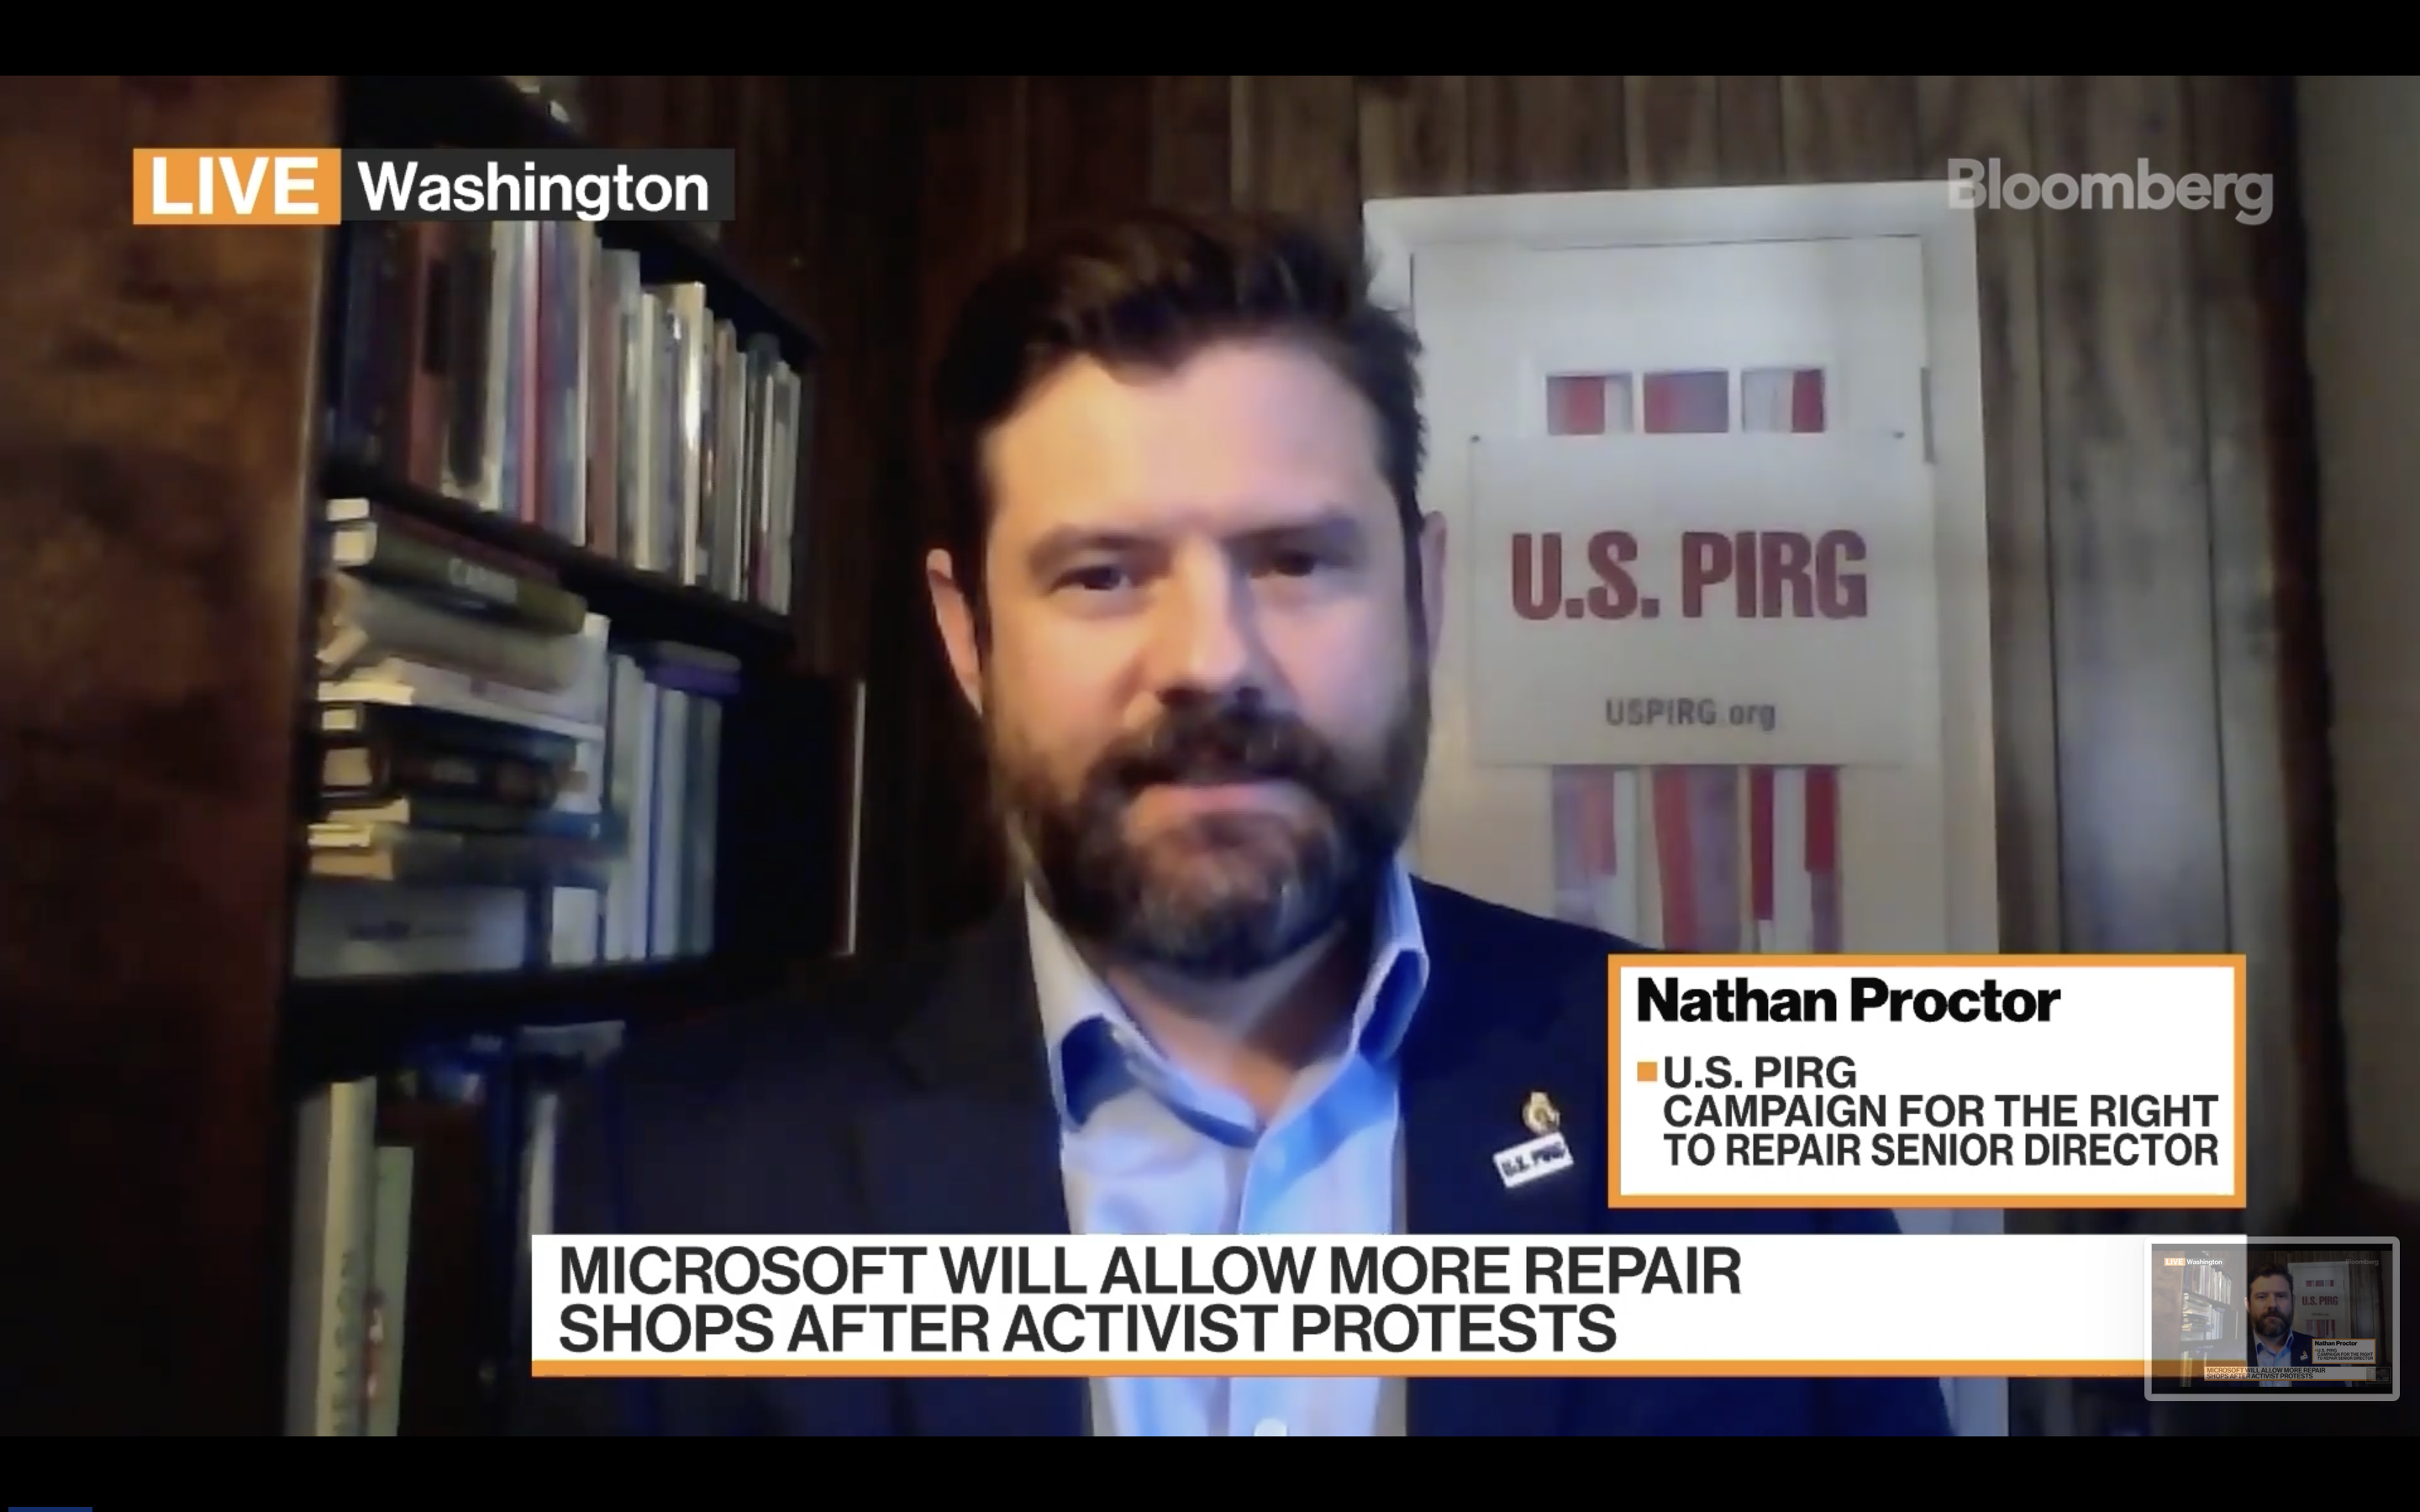 Nathan Proctor, Right To Repair Advocate on Bloomberg TV